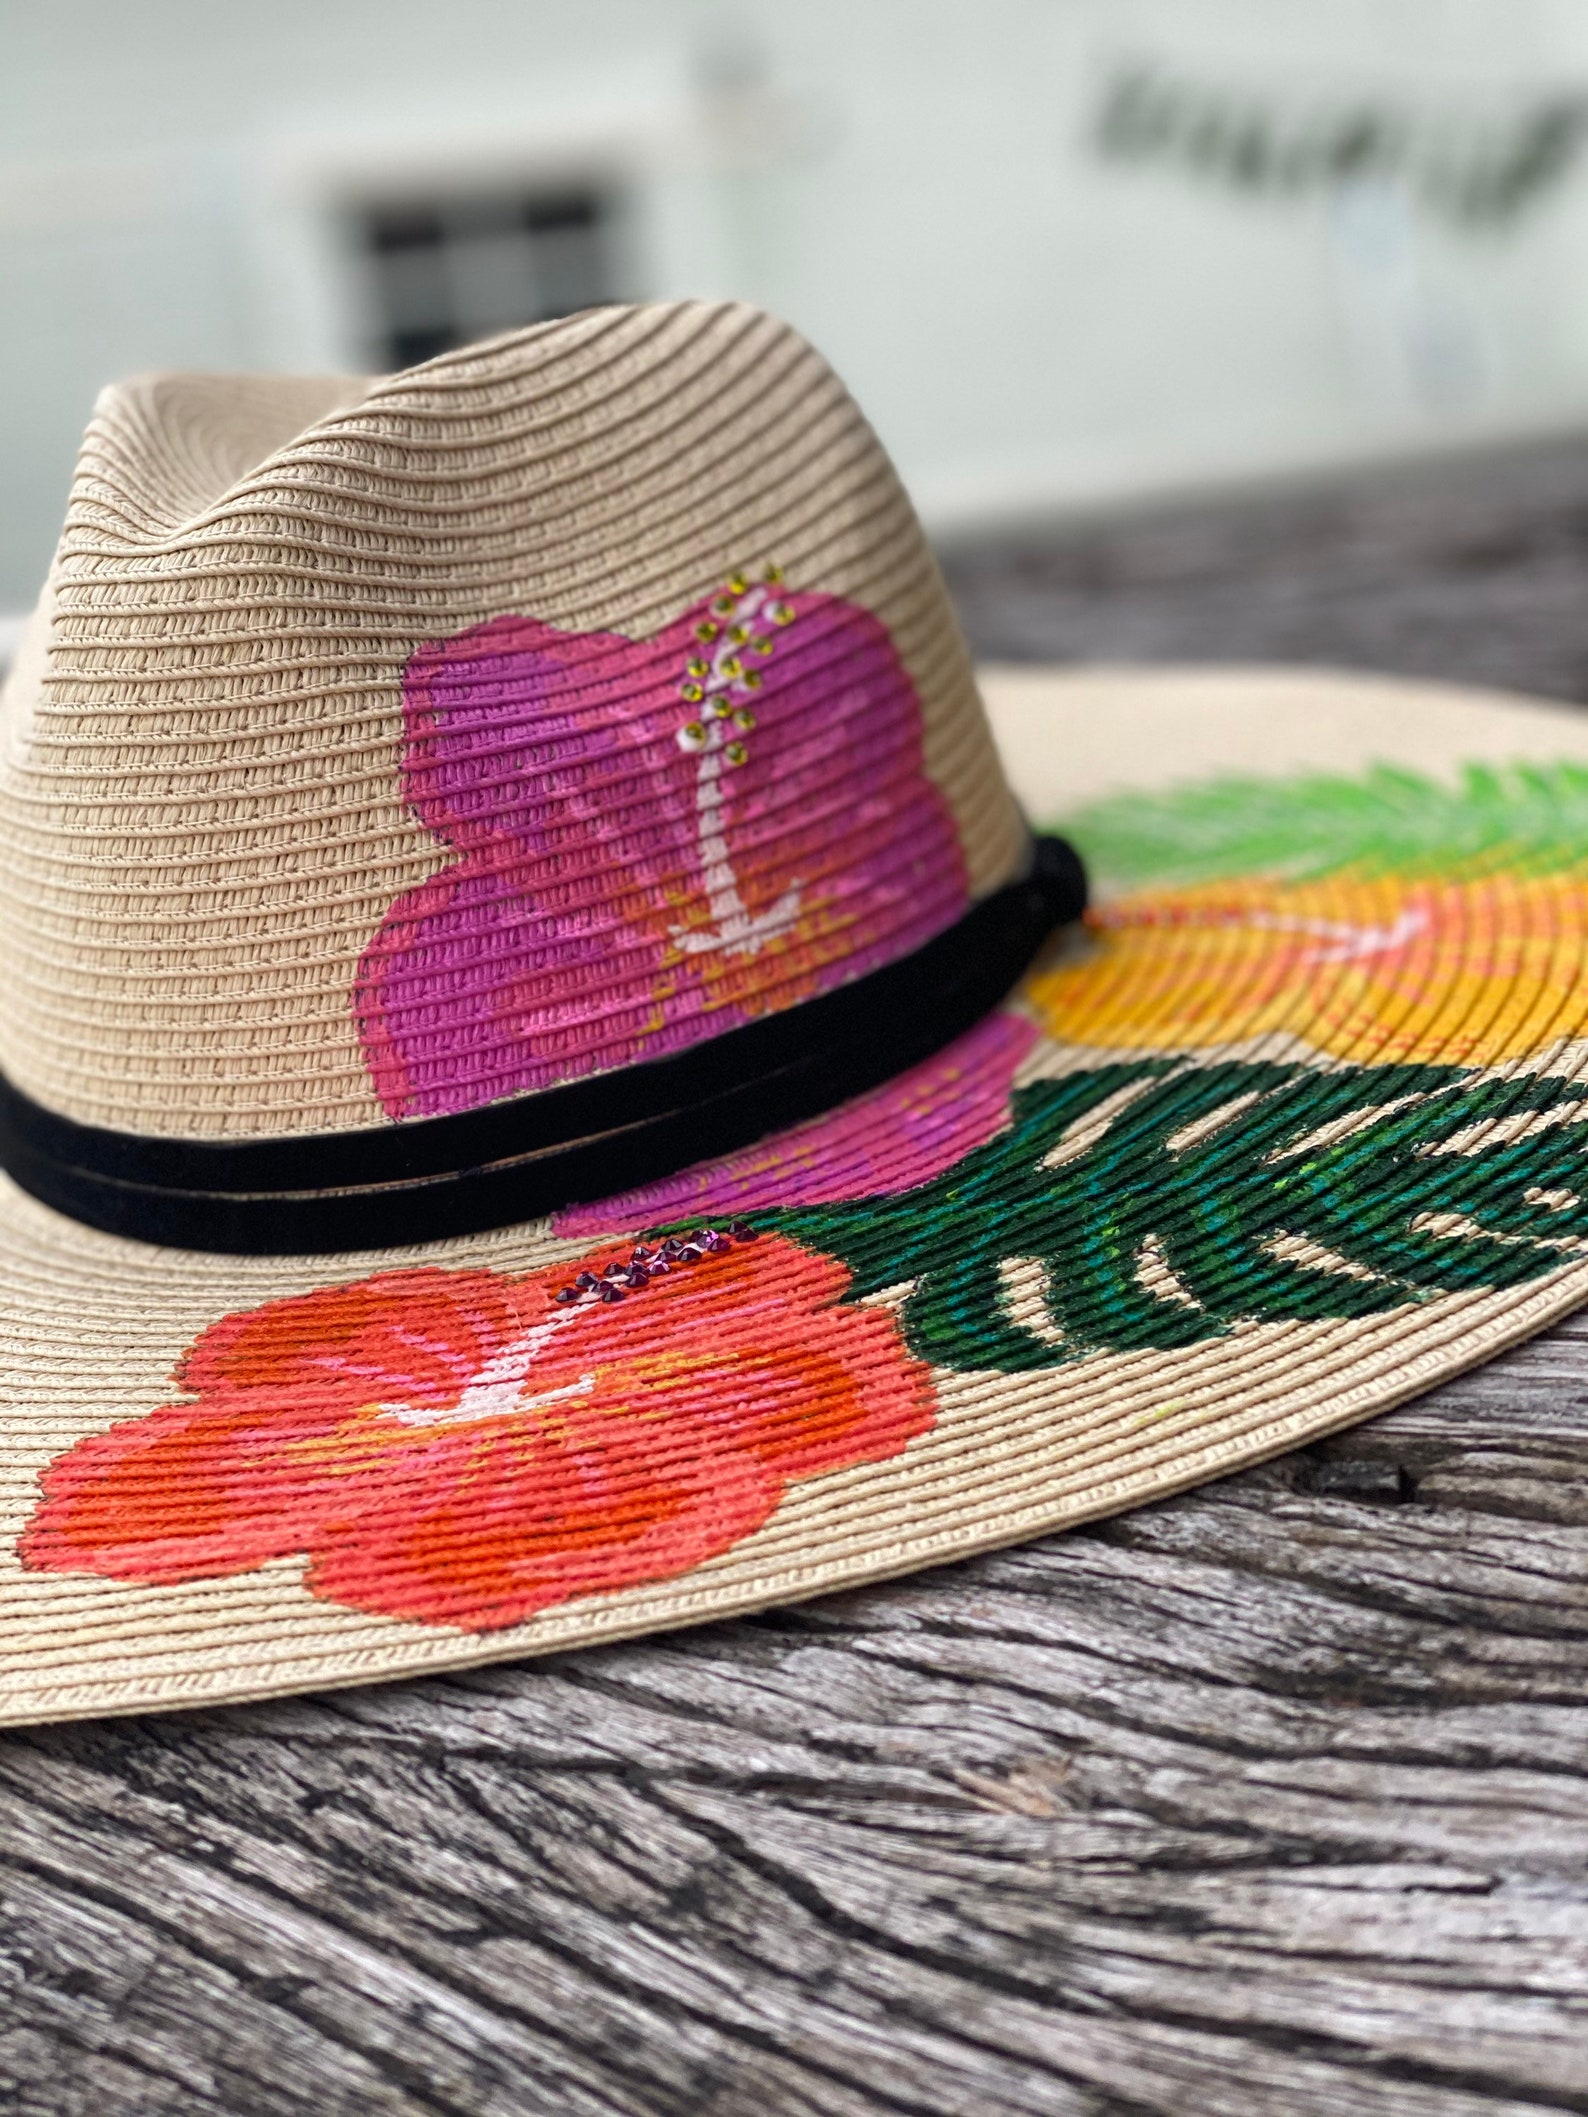 Hand Painted Tropical Flowers Straw Hat. Sun Hat Boho Chic - Etsy